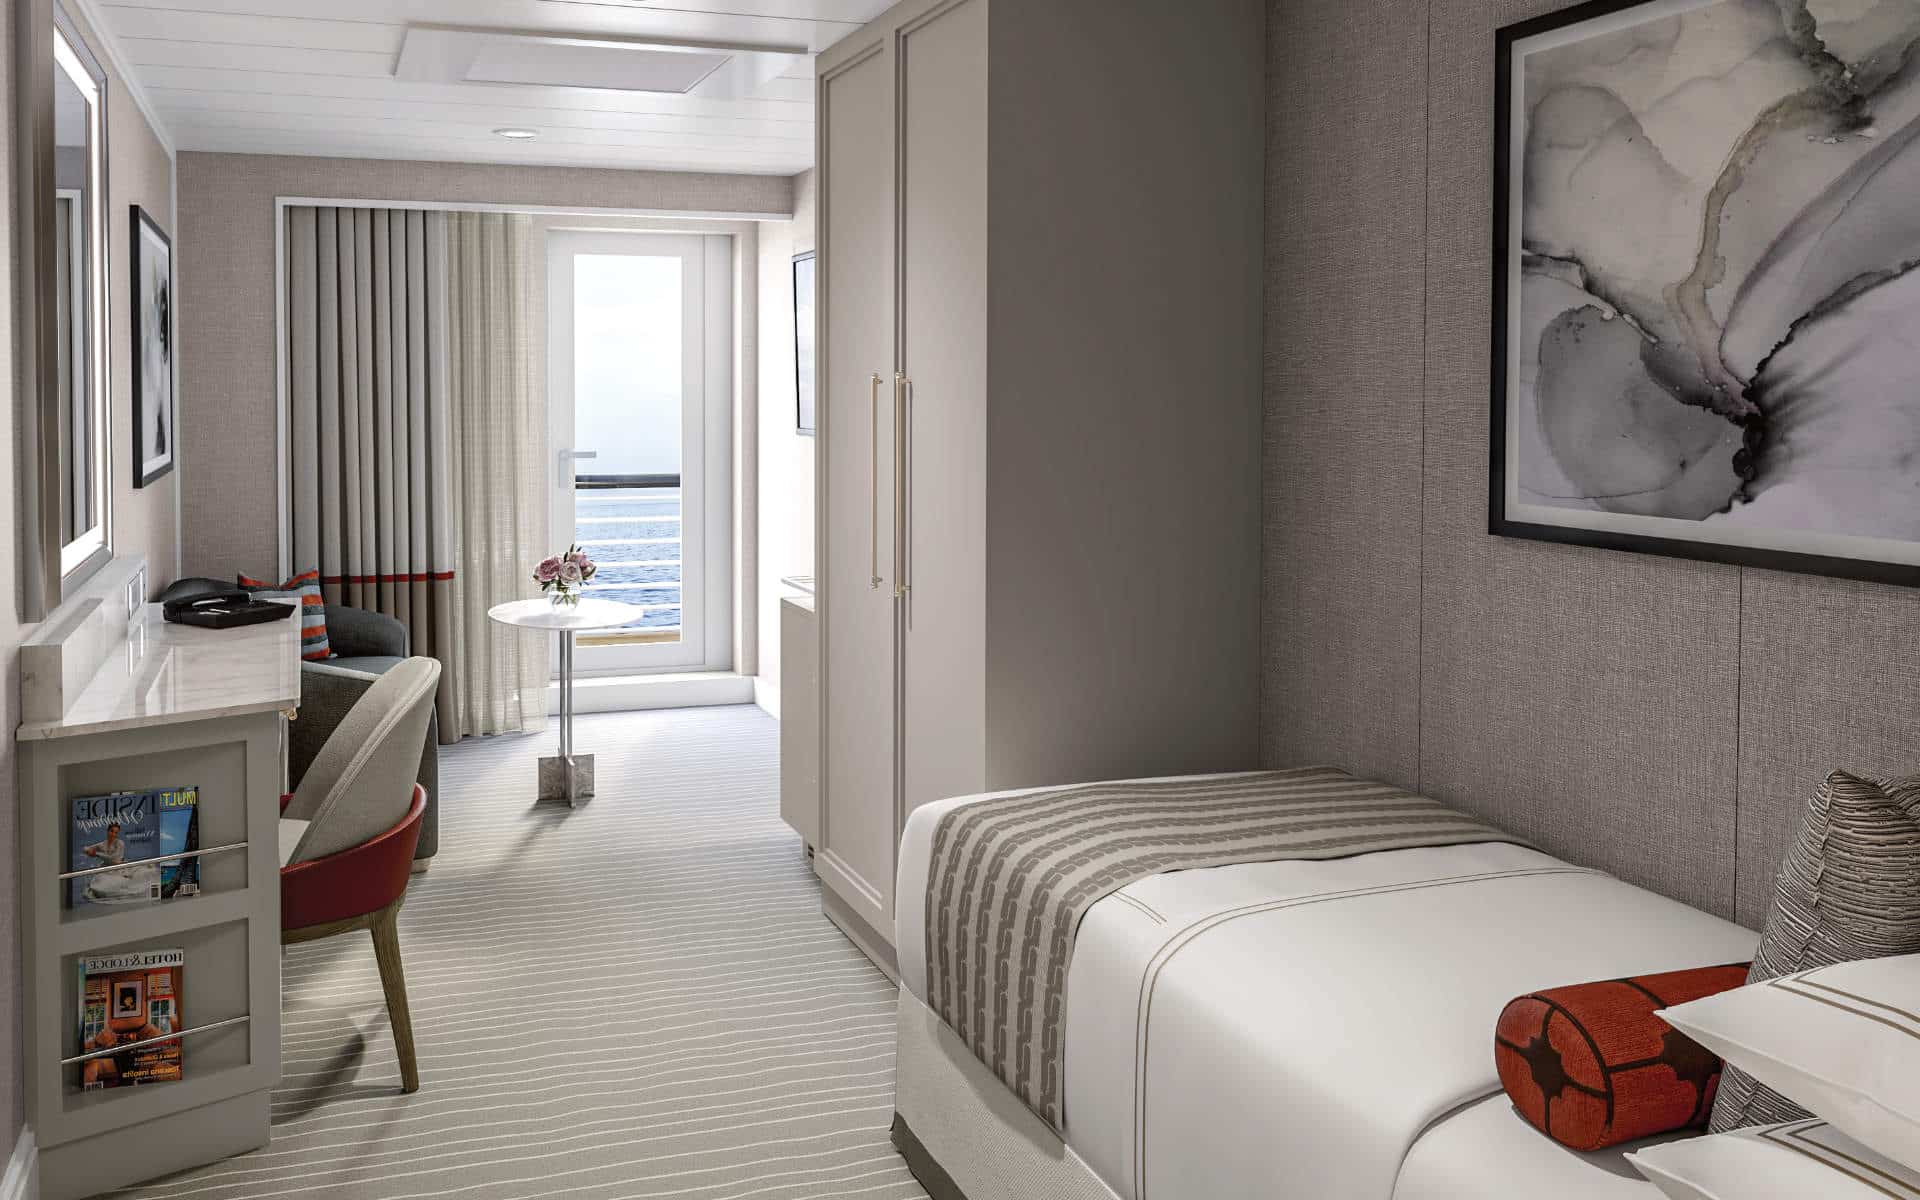 Solo staterooms on Oceania's Vista include extra benefits.